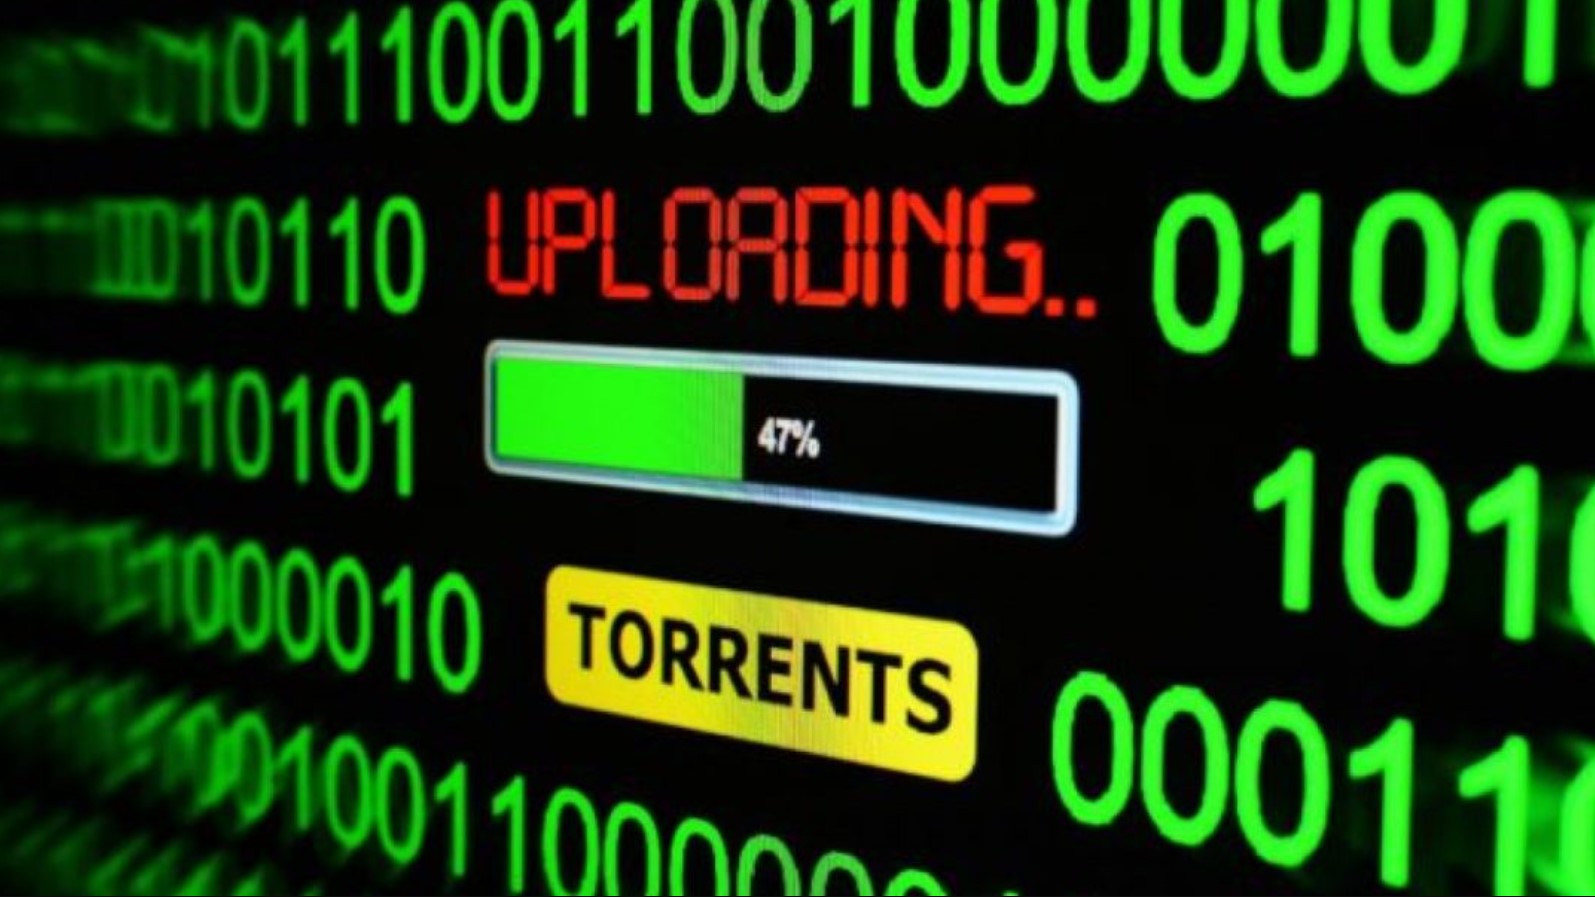 The Top 20 Websites To Search And Download Torrents In 2021